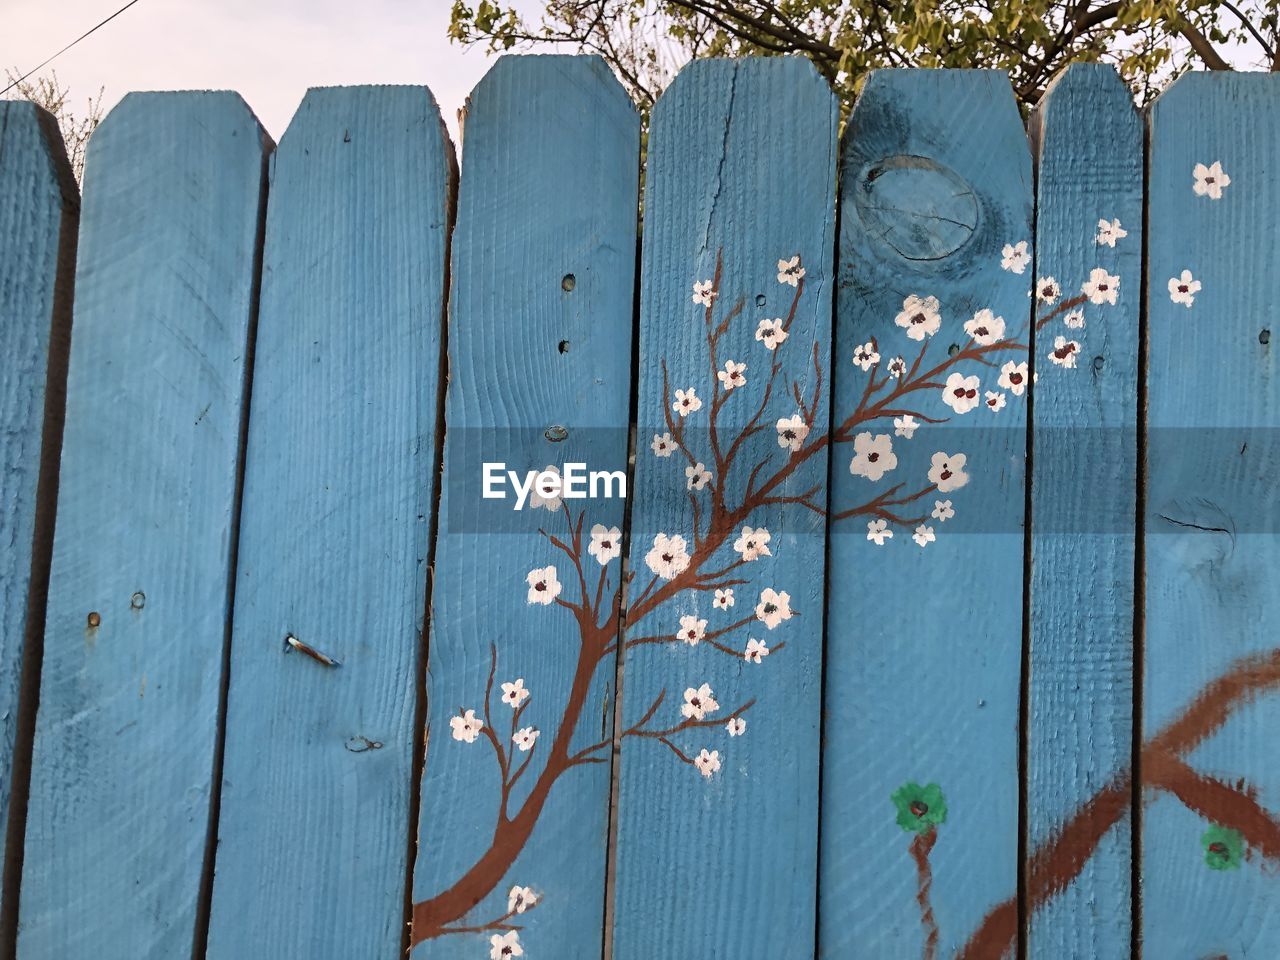 CLOSE-UP OF PLANTS GROWING ON FENCE